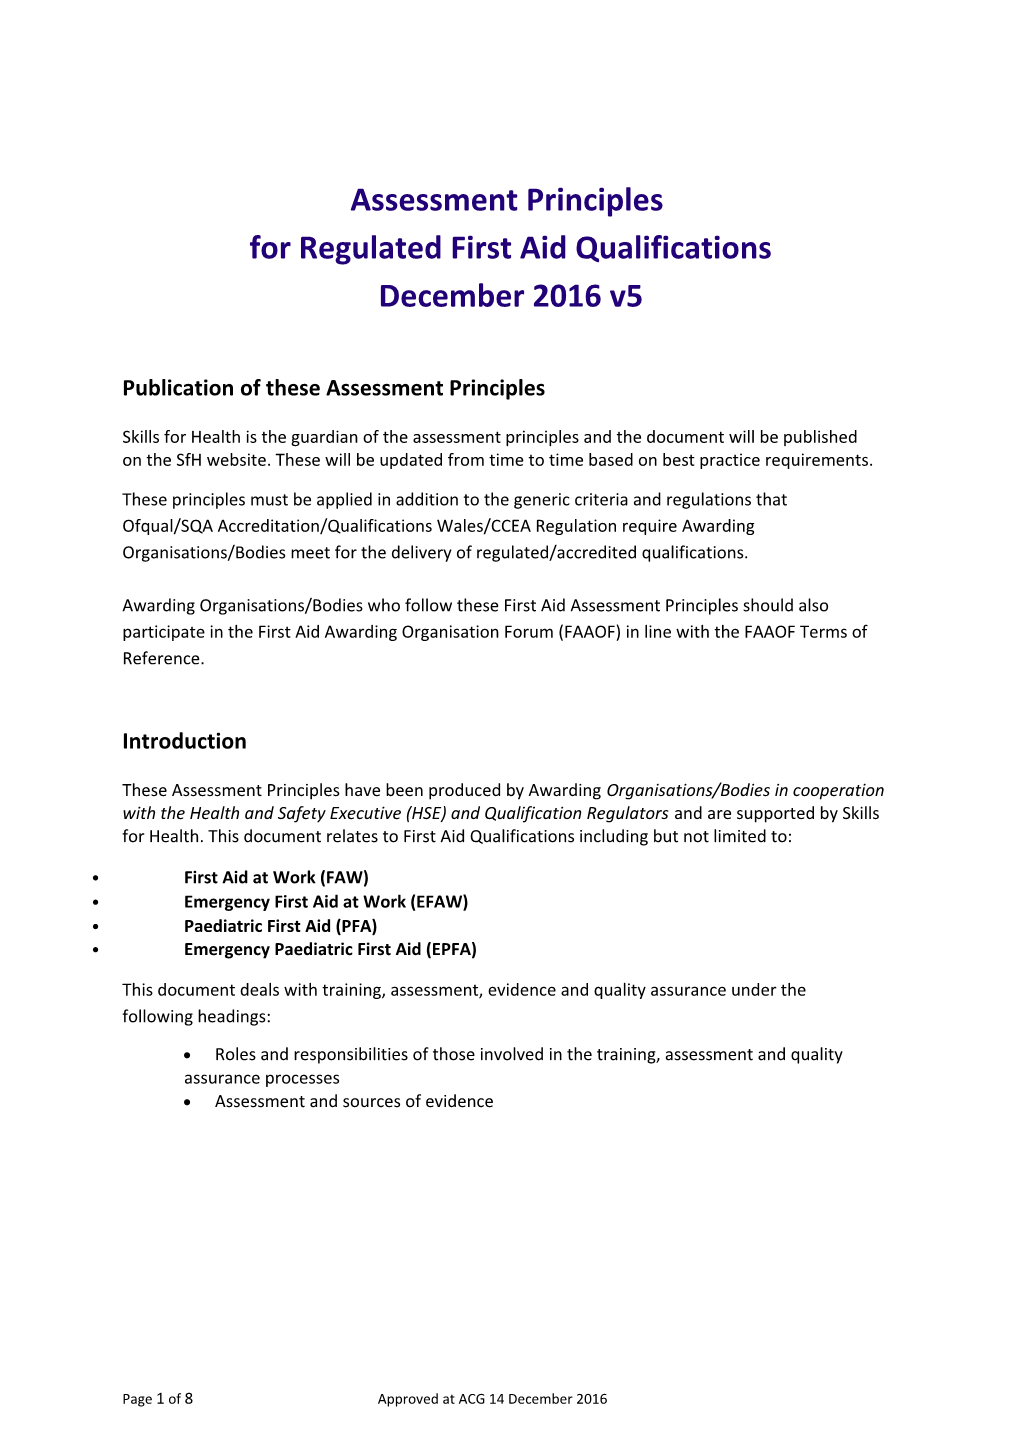 For Regulated First Aid Qualifications